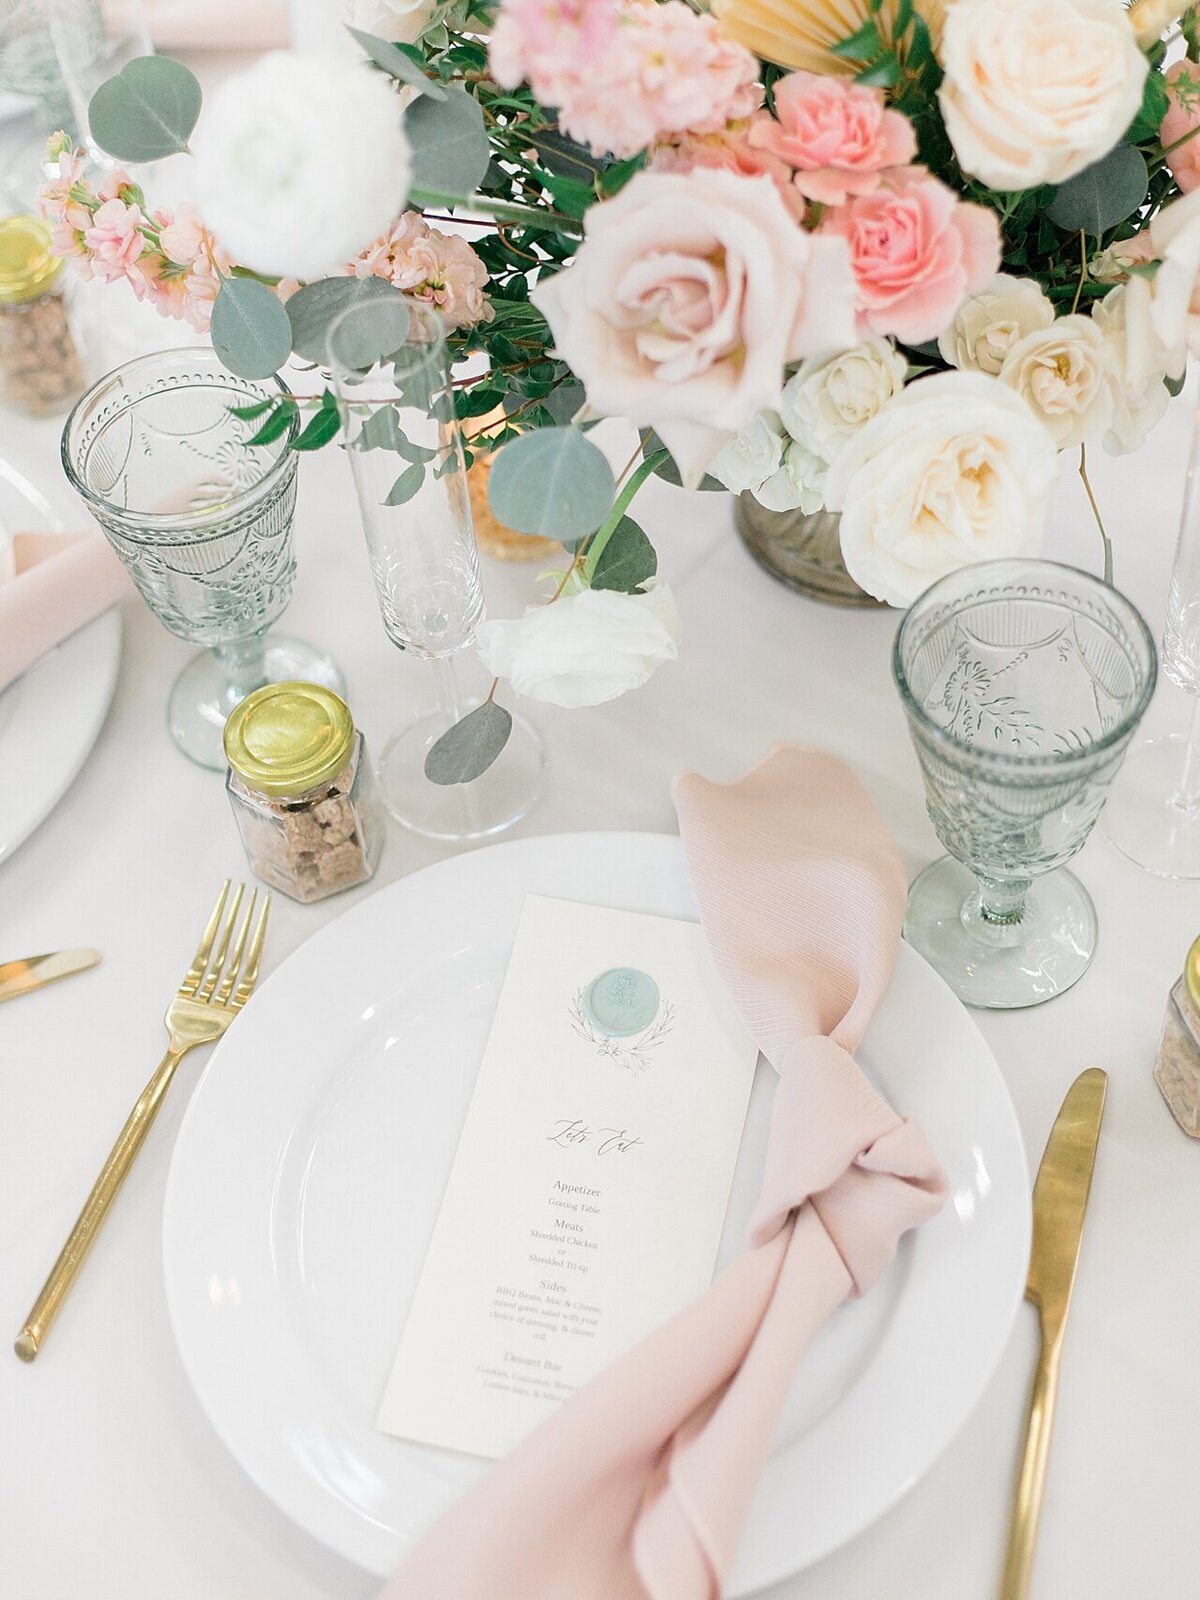 Emerald grace floral design wedding with Lauren Westra photography almond orchard bride and groom soft blush color palette central california weddings_2499